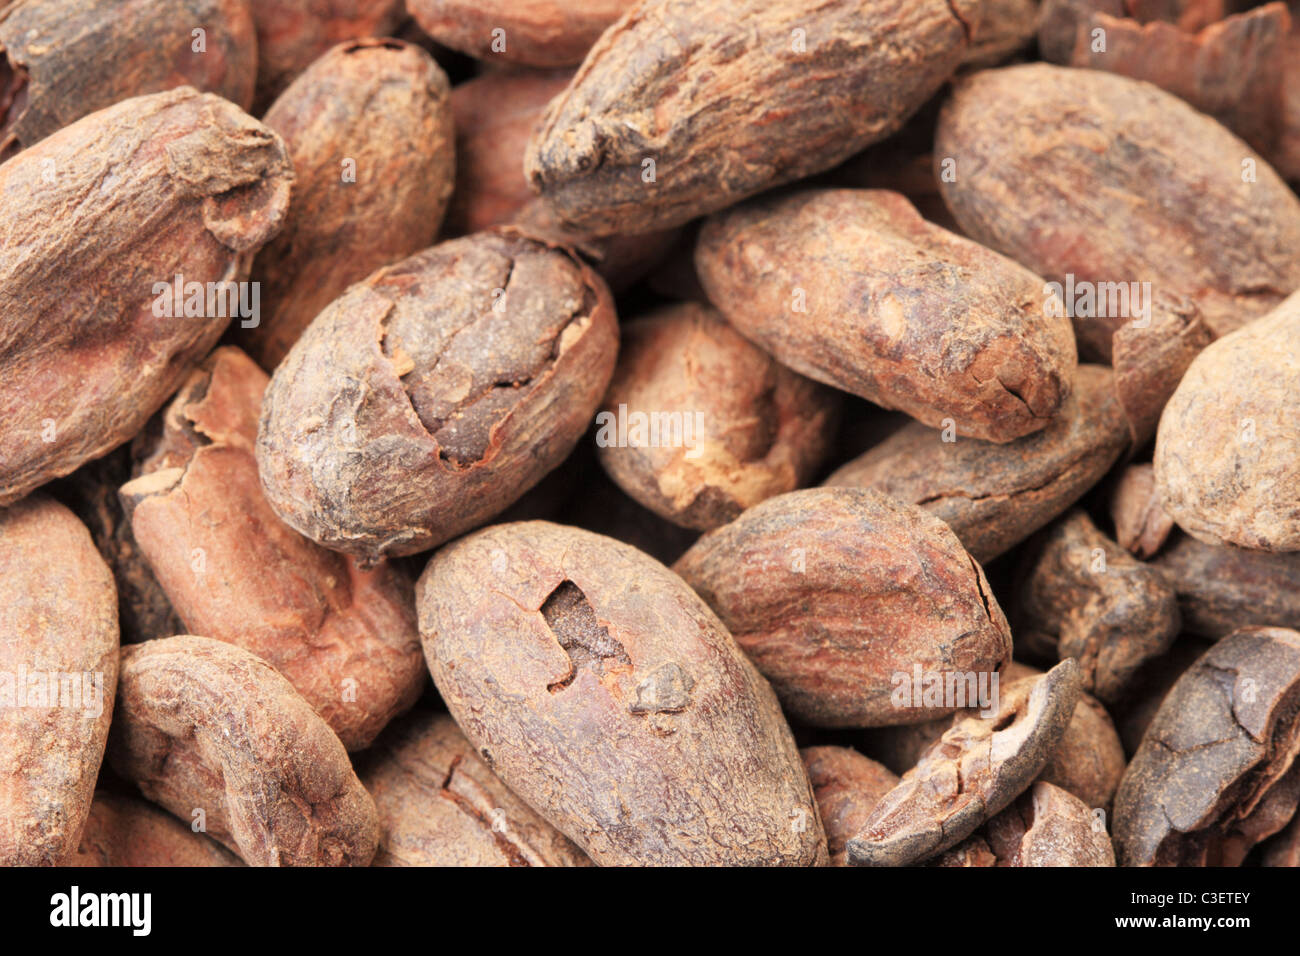 cocoa or cacao beans macro image Stock Photo